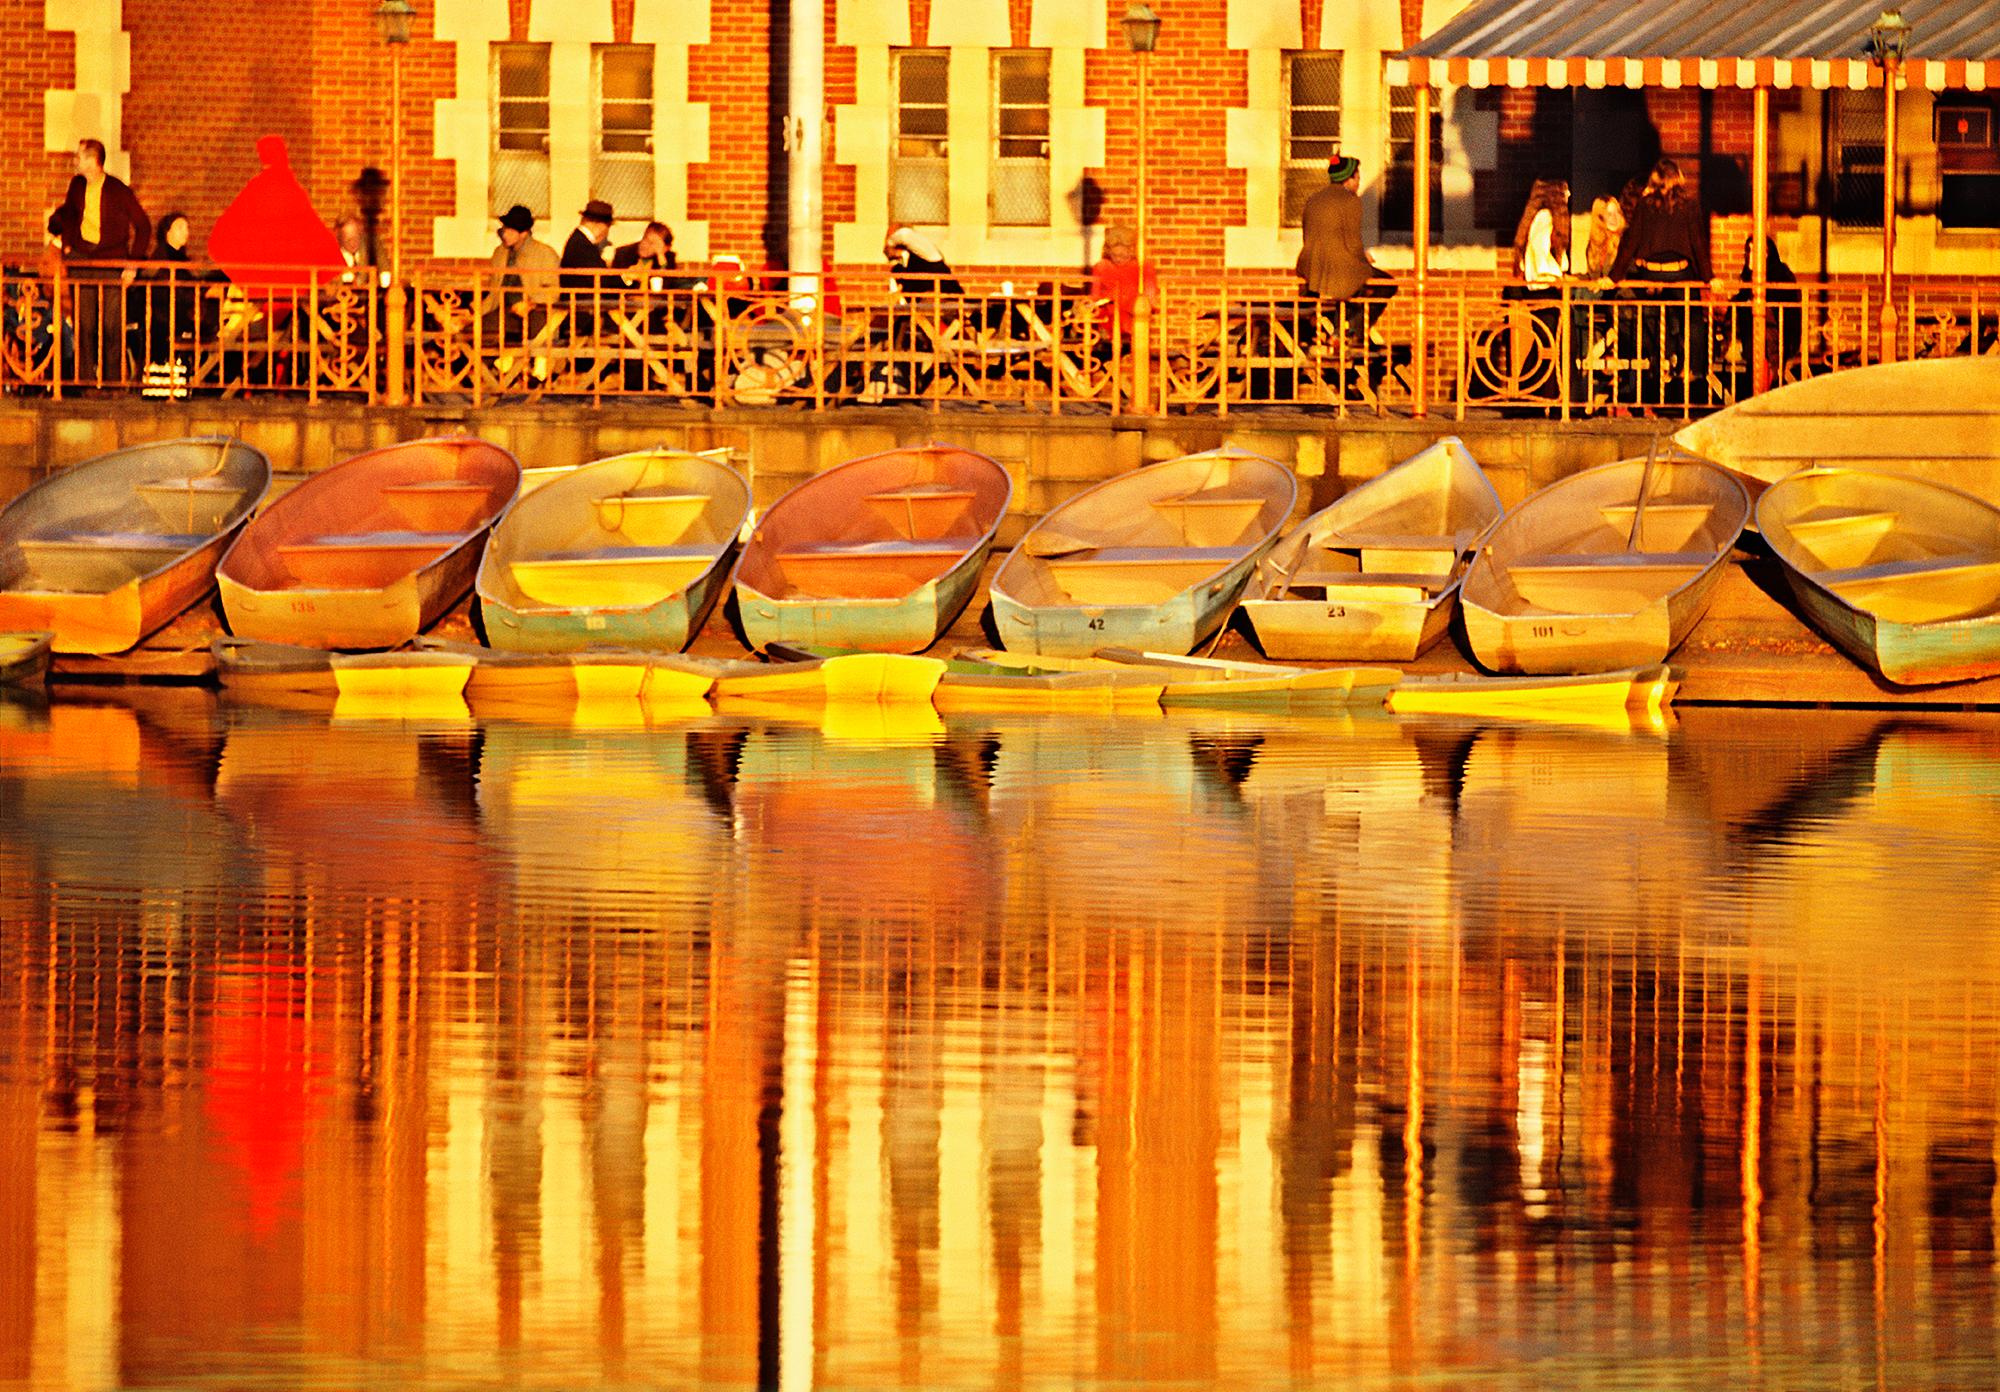 Mitchell Funk Landscape Photograph - Central Park Boat House in Golden Light Impressionist Reflections